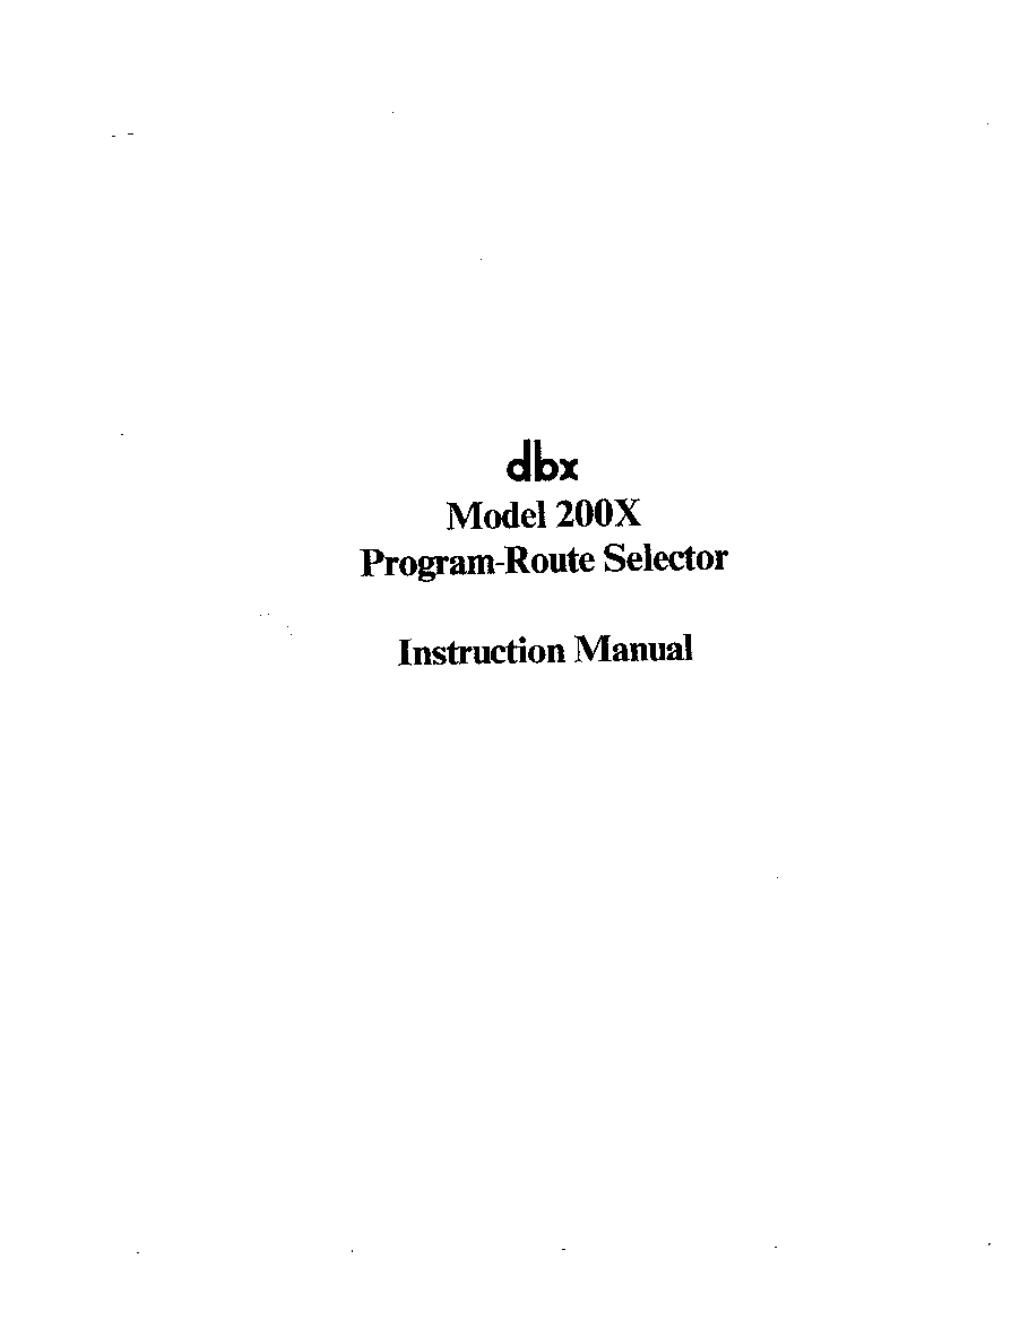 dbx 200 x owners manual